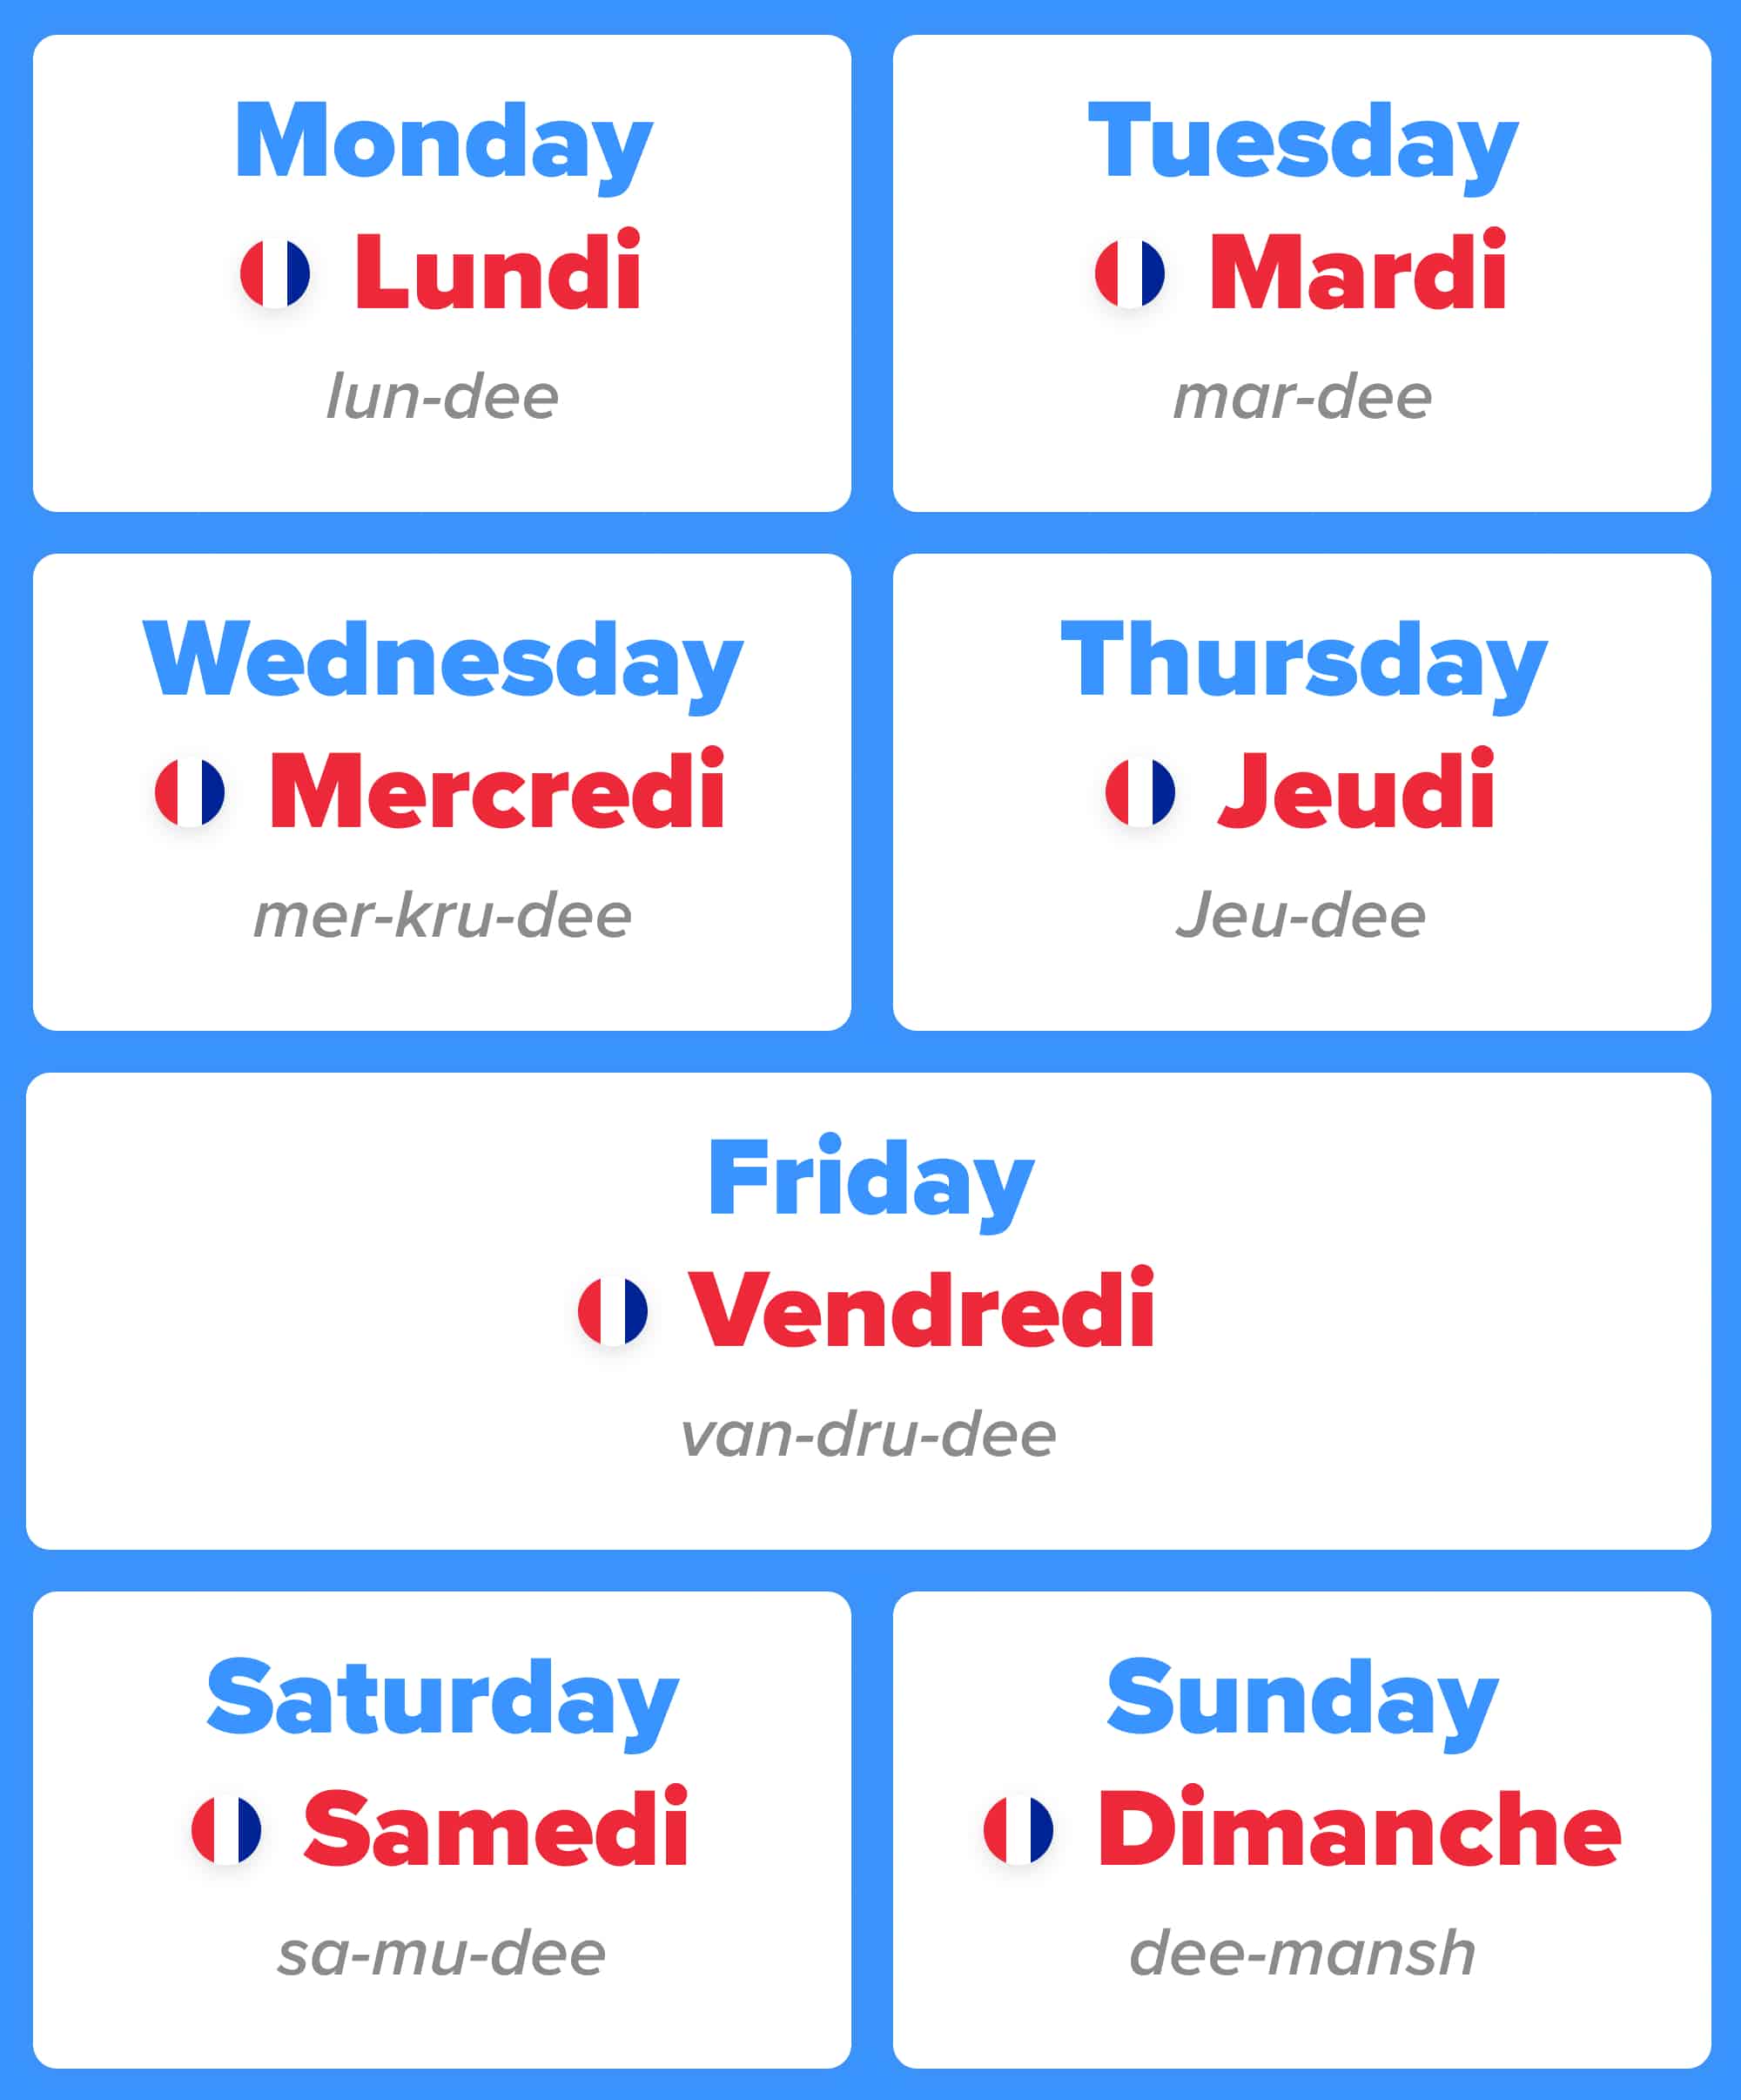 days-of-the-week-in-french-word-origins-tips-for-using-them-and-extra